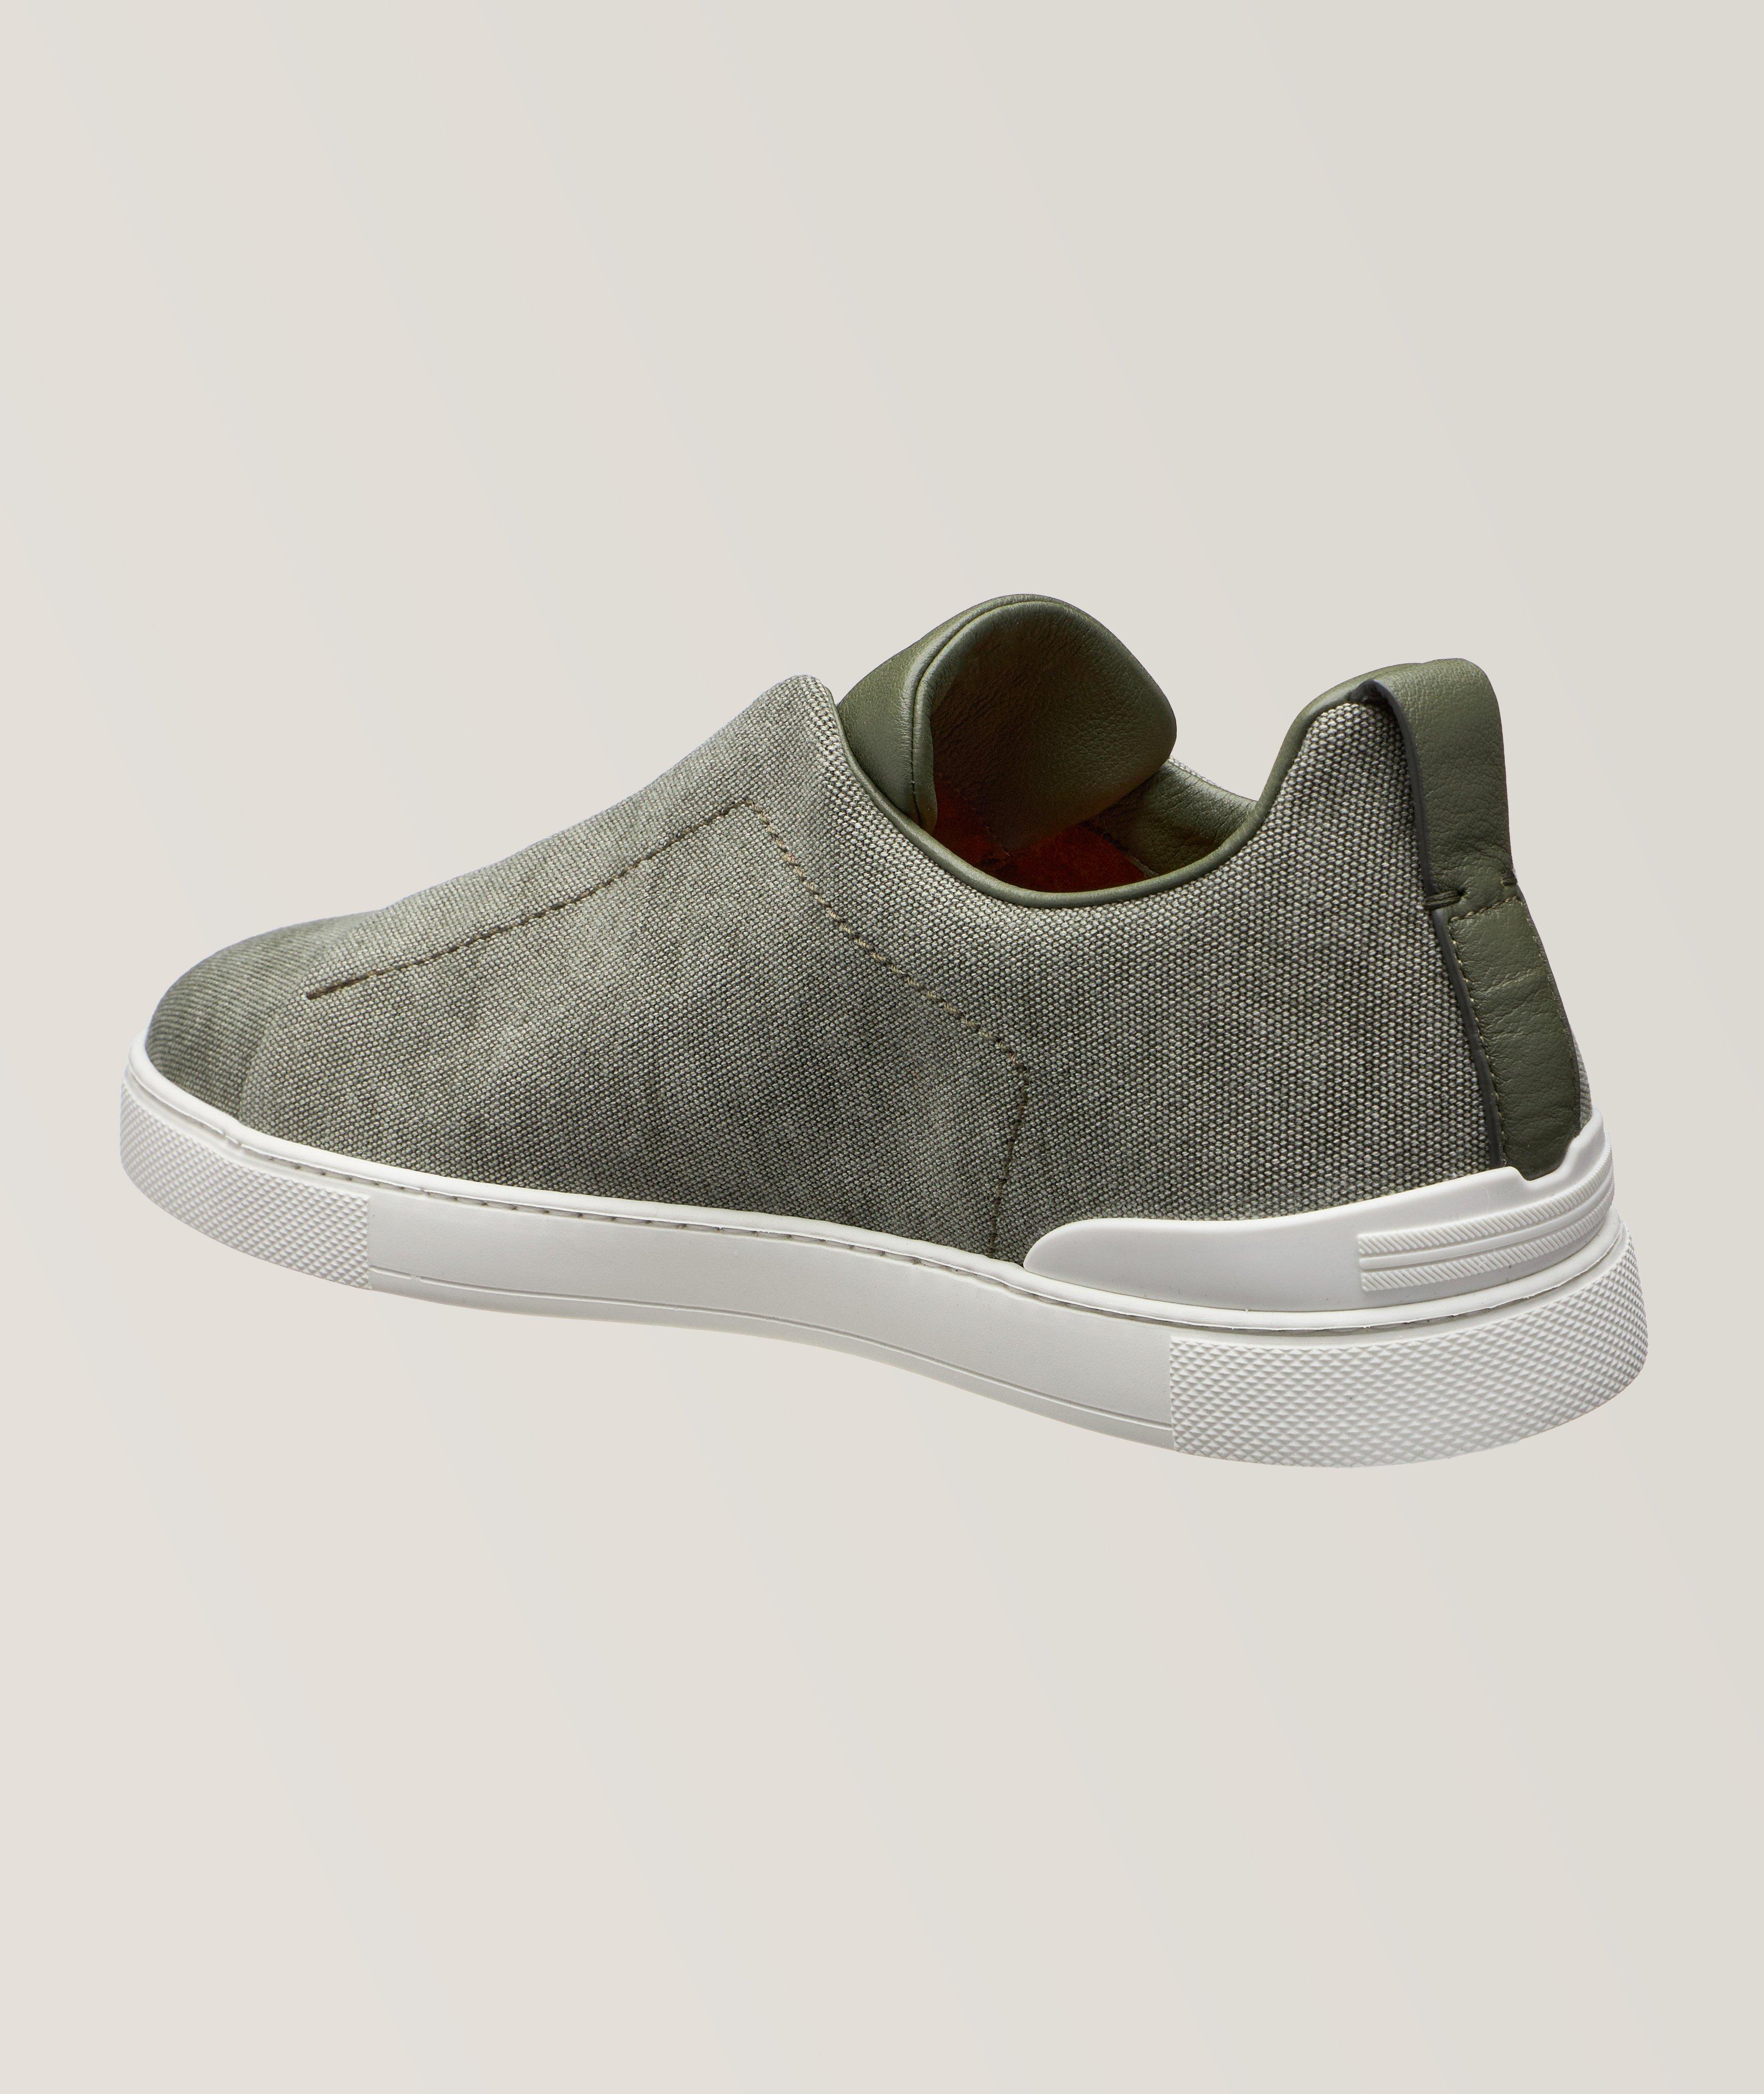 Triple Stitch Canvas Slip-On Sneakers image 1